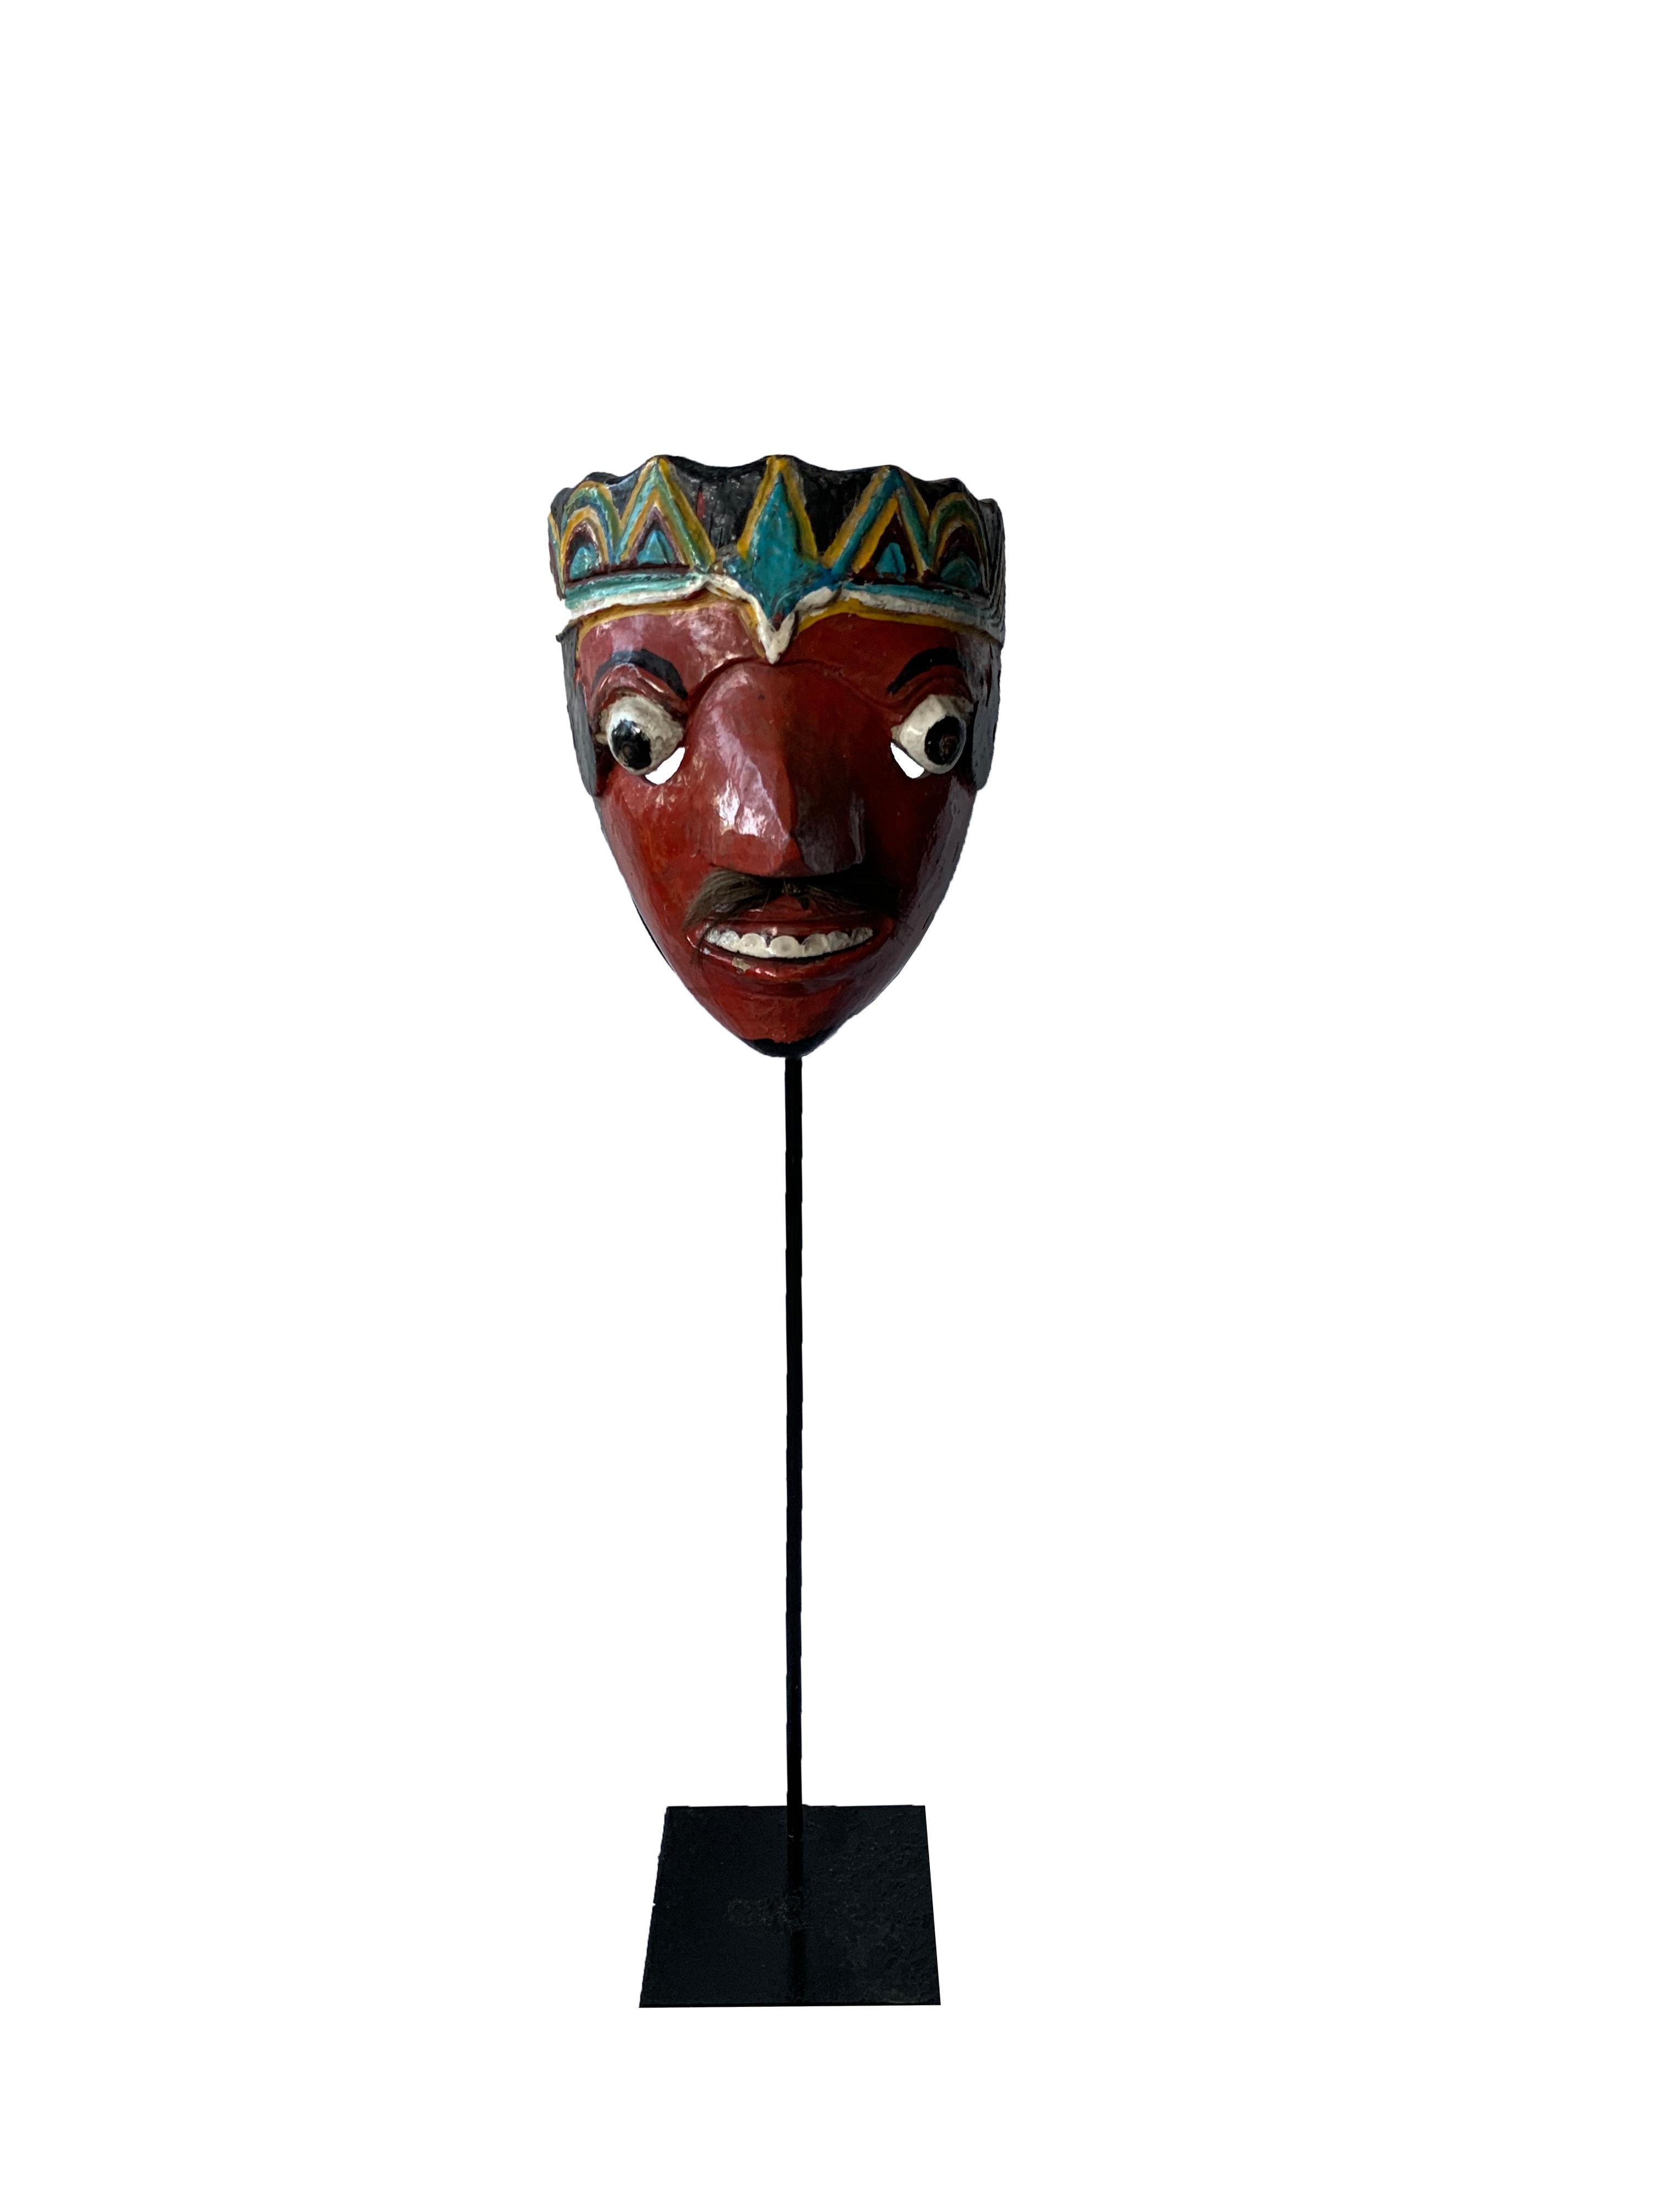 This mid-20th century ‘Wayang topeng’ mask was used in Javanese masked dance performances. This mask features a bright mix of red, yellow, white & blue polychrome. There is also a moustache using 